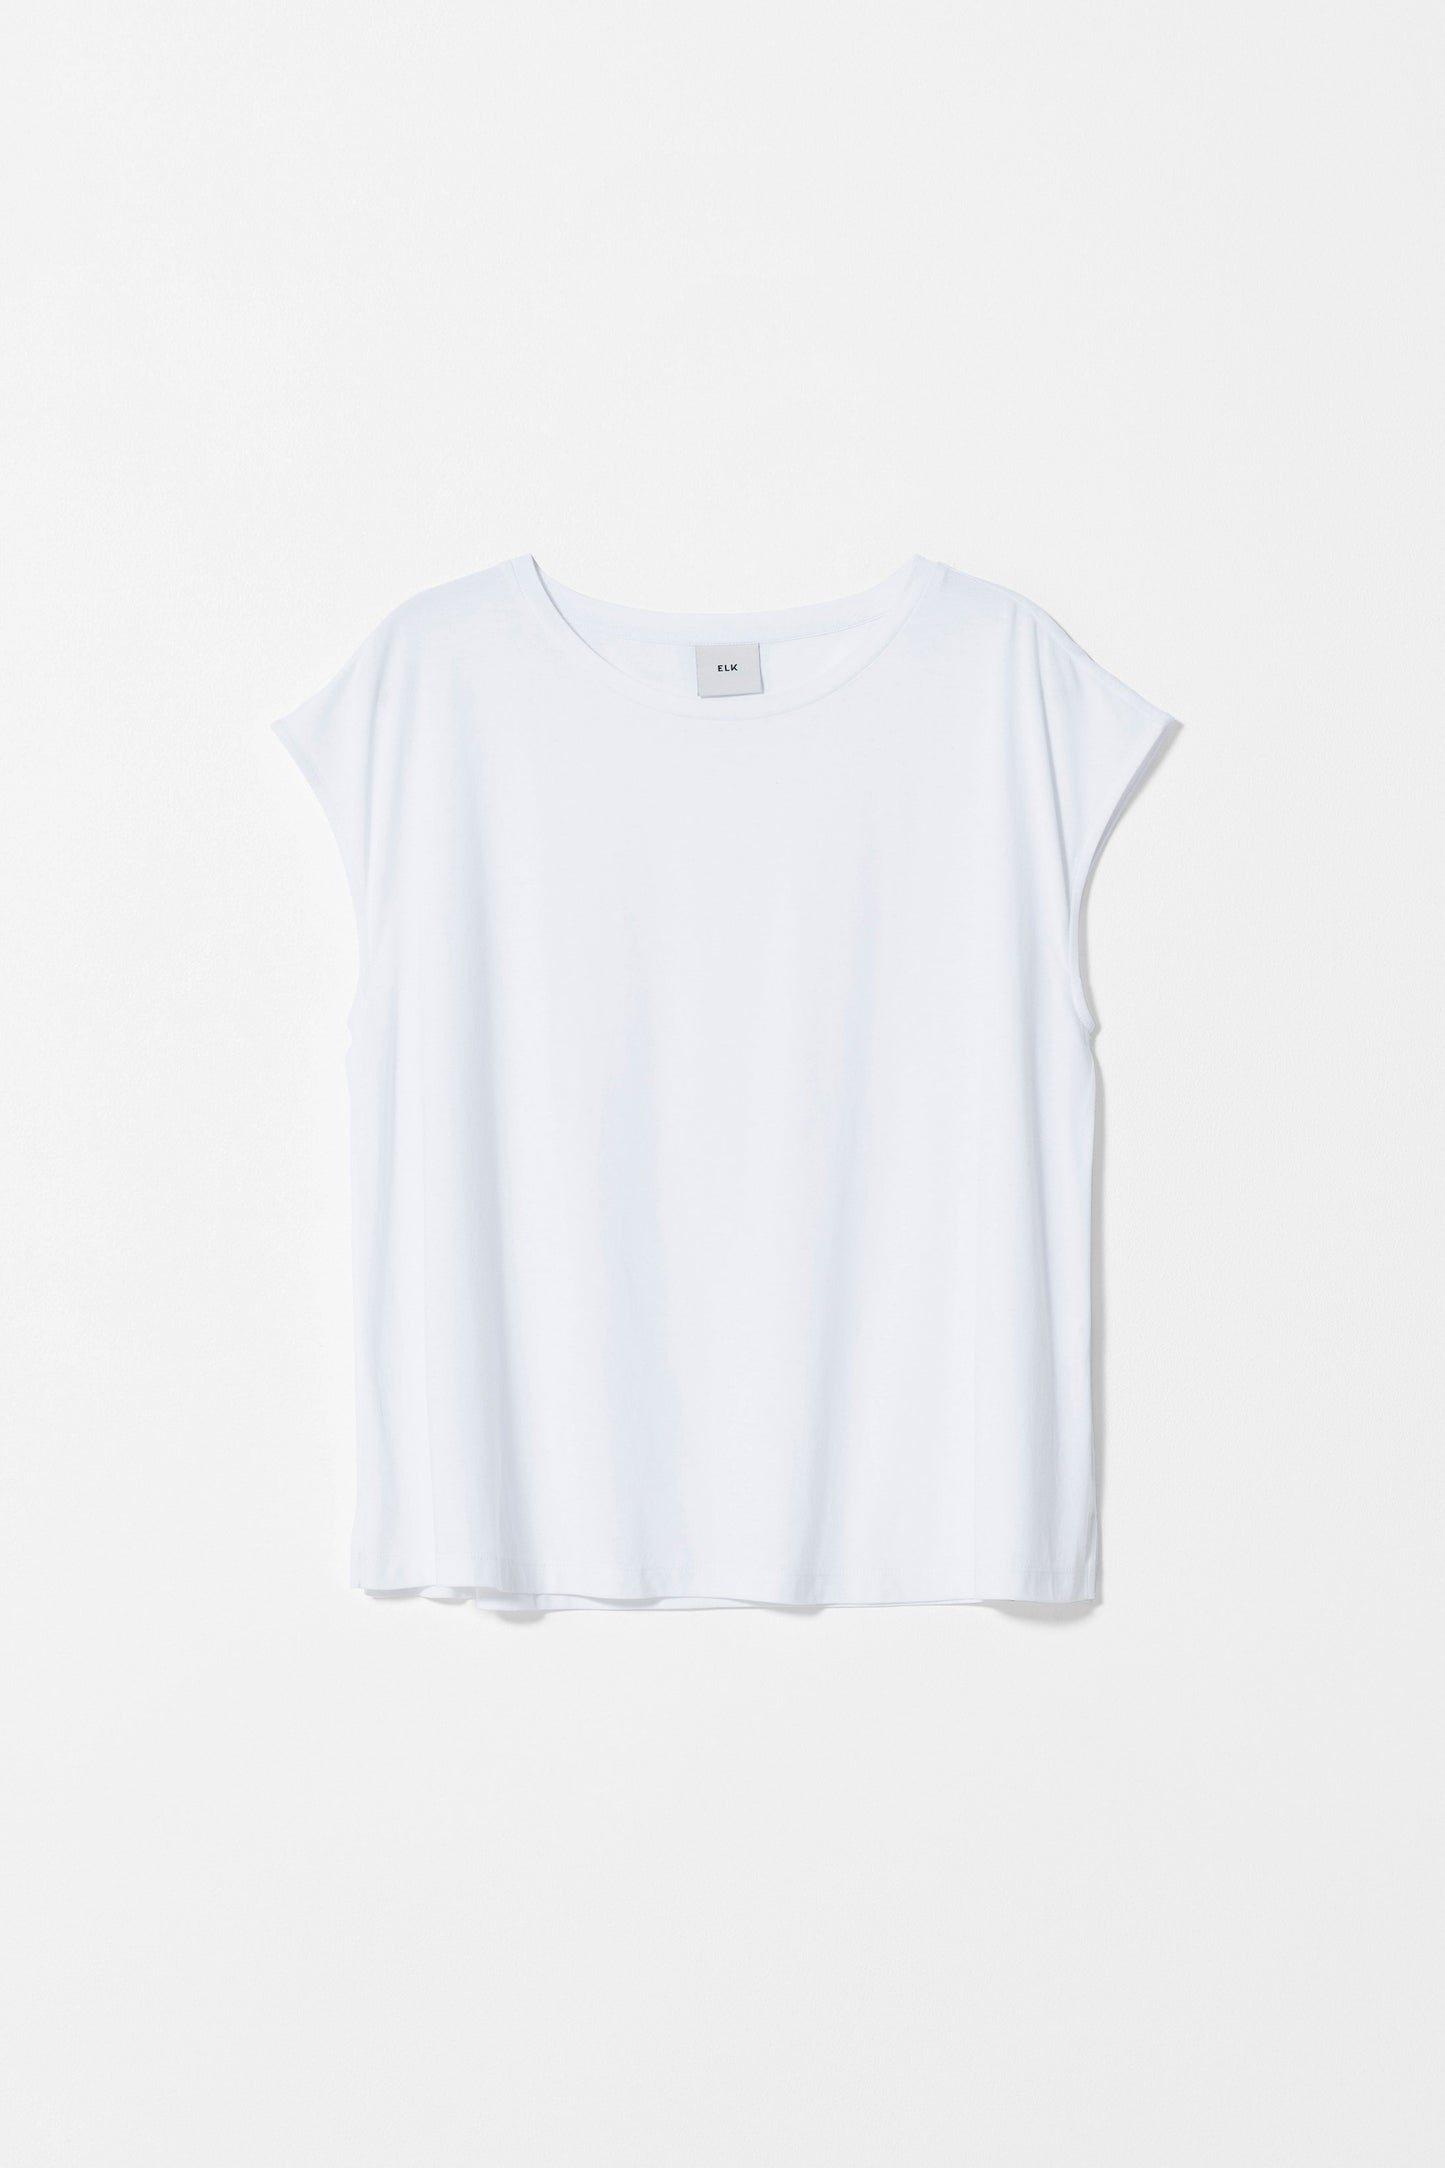 Oue Lightweight A-Line Tee Front | White